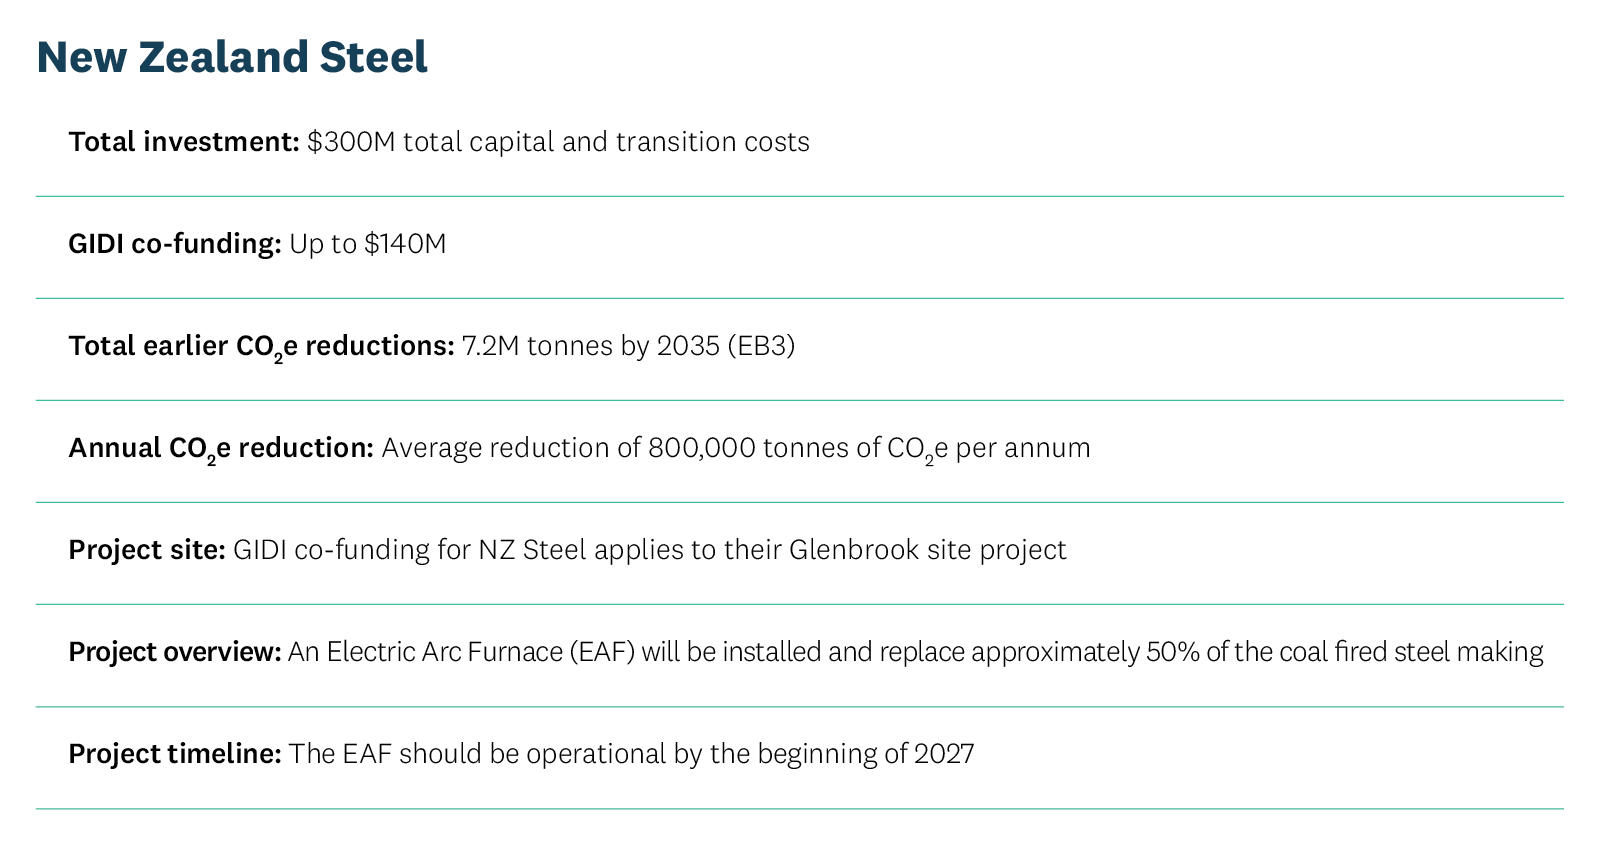 Infographic includes NZ Steel project details. 